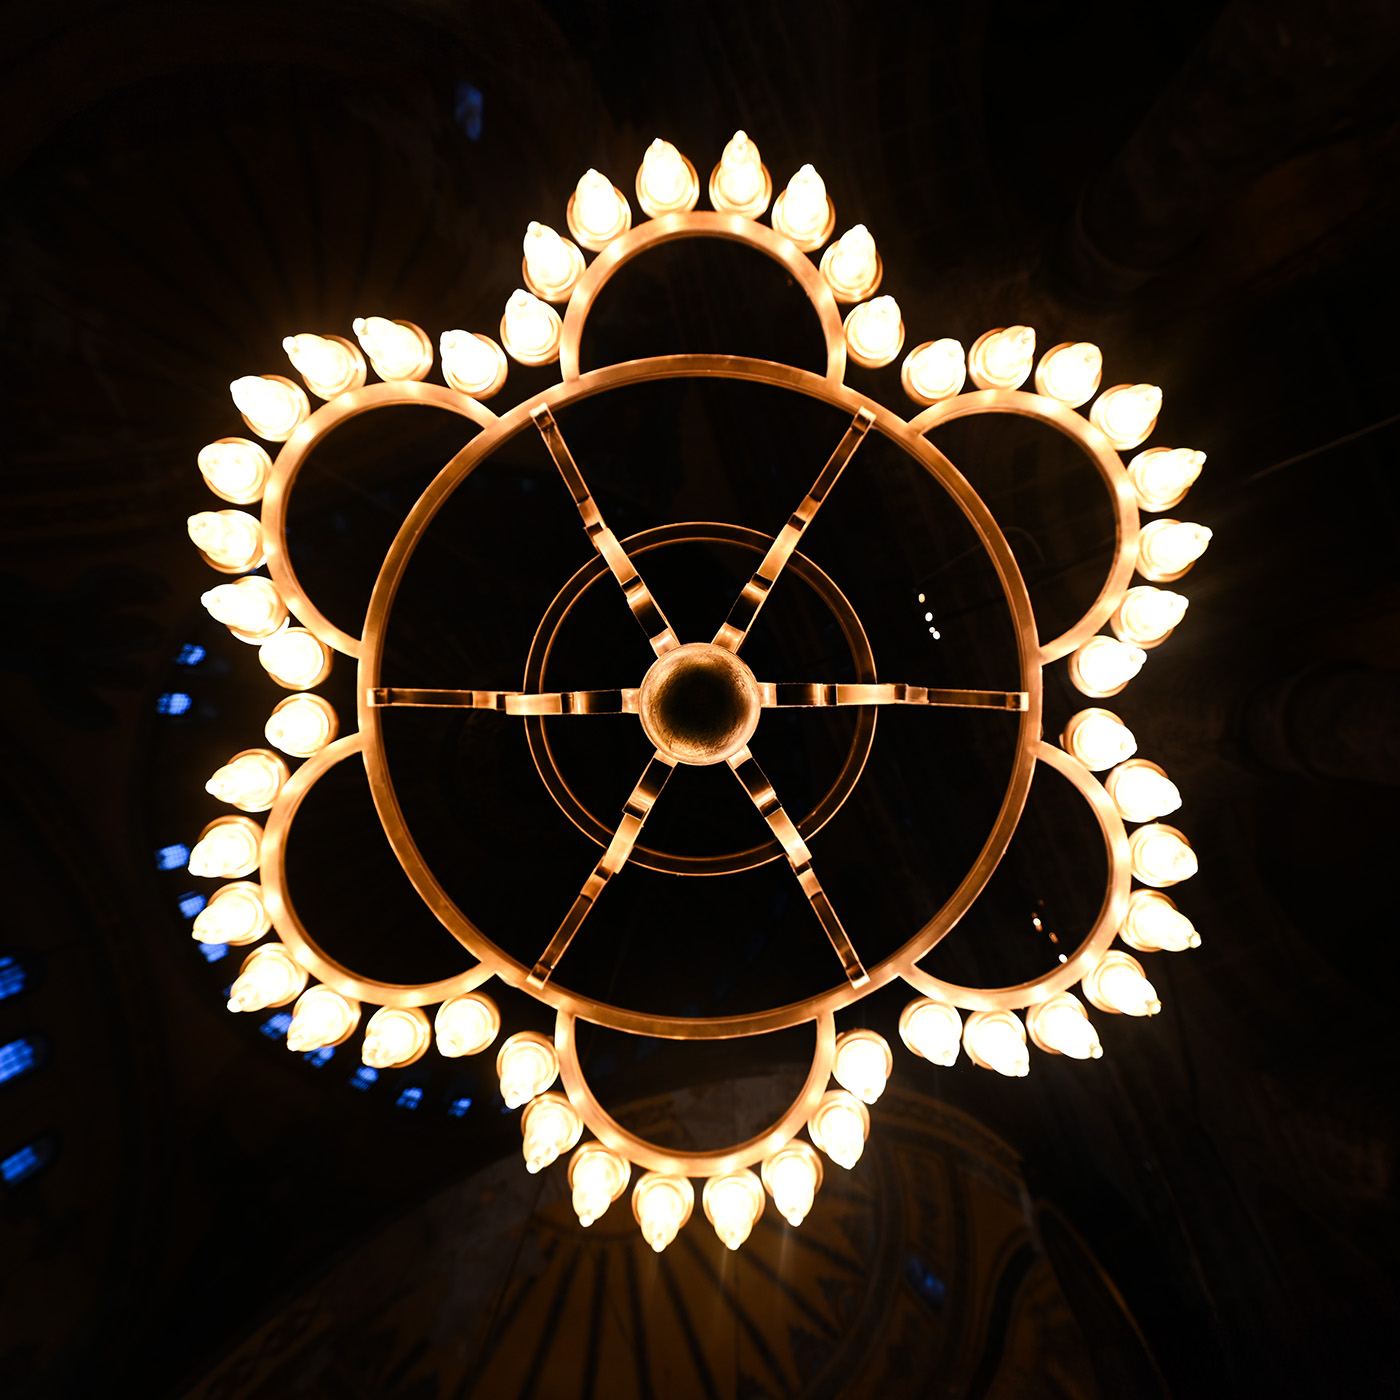 Chandelier from a mosque